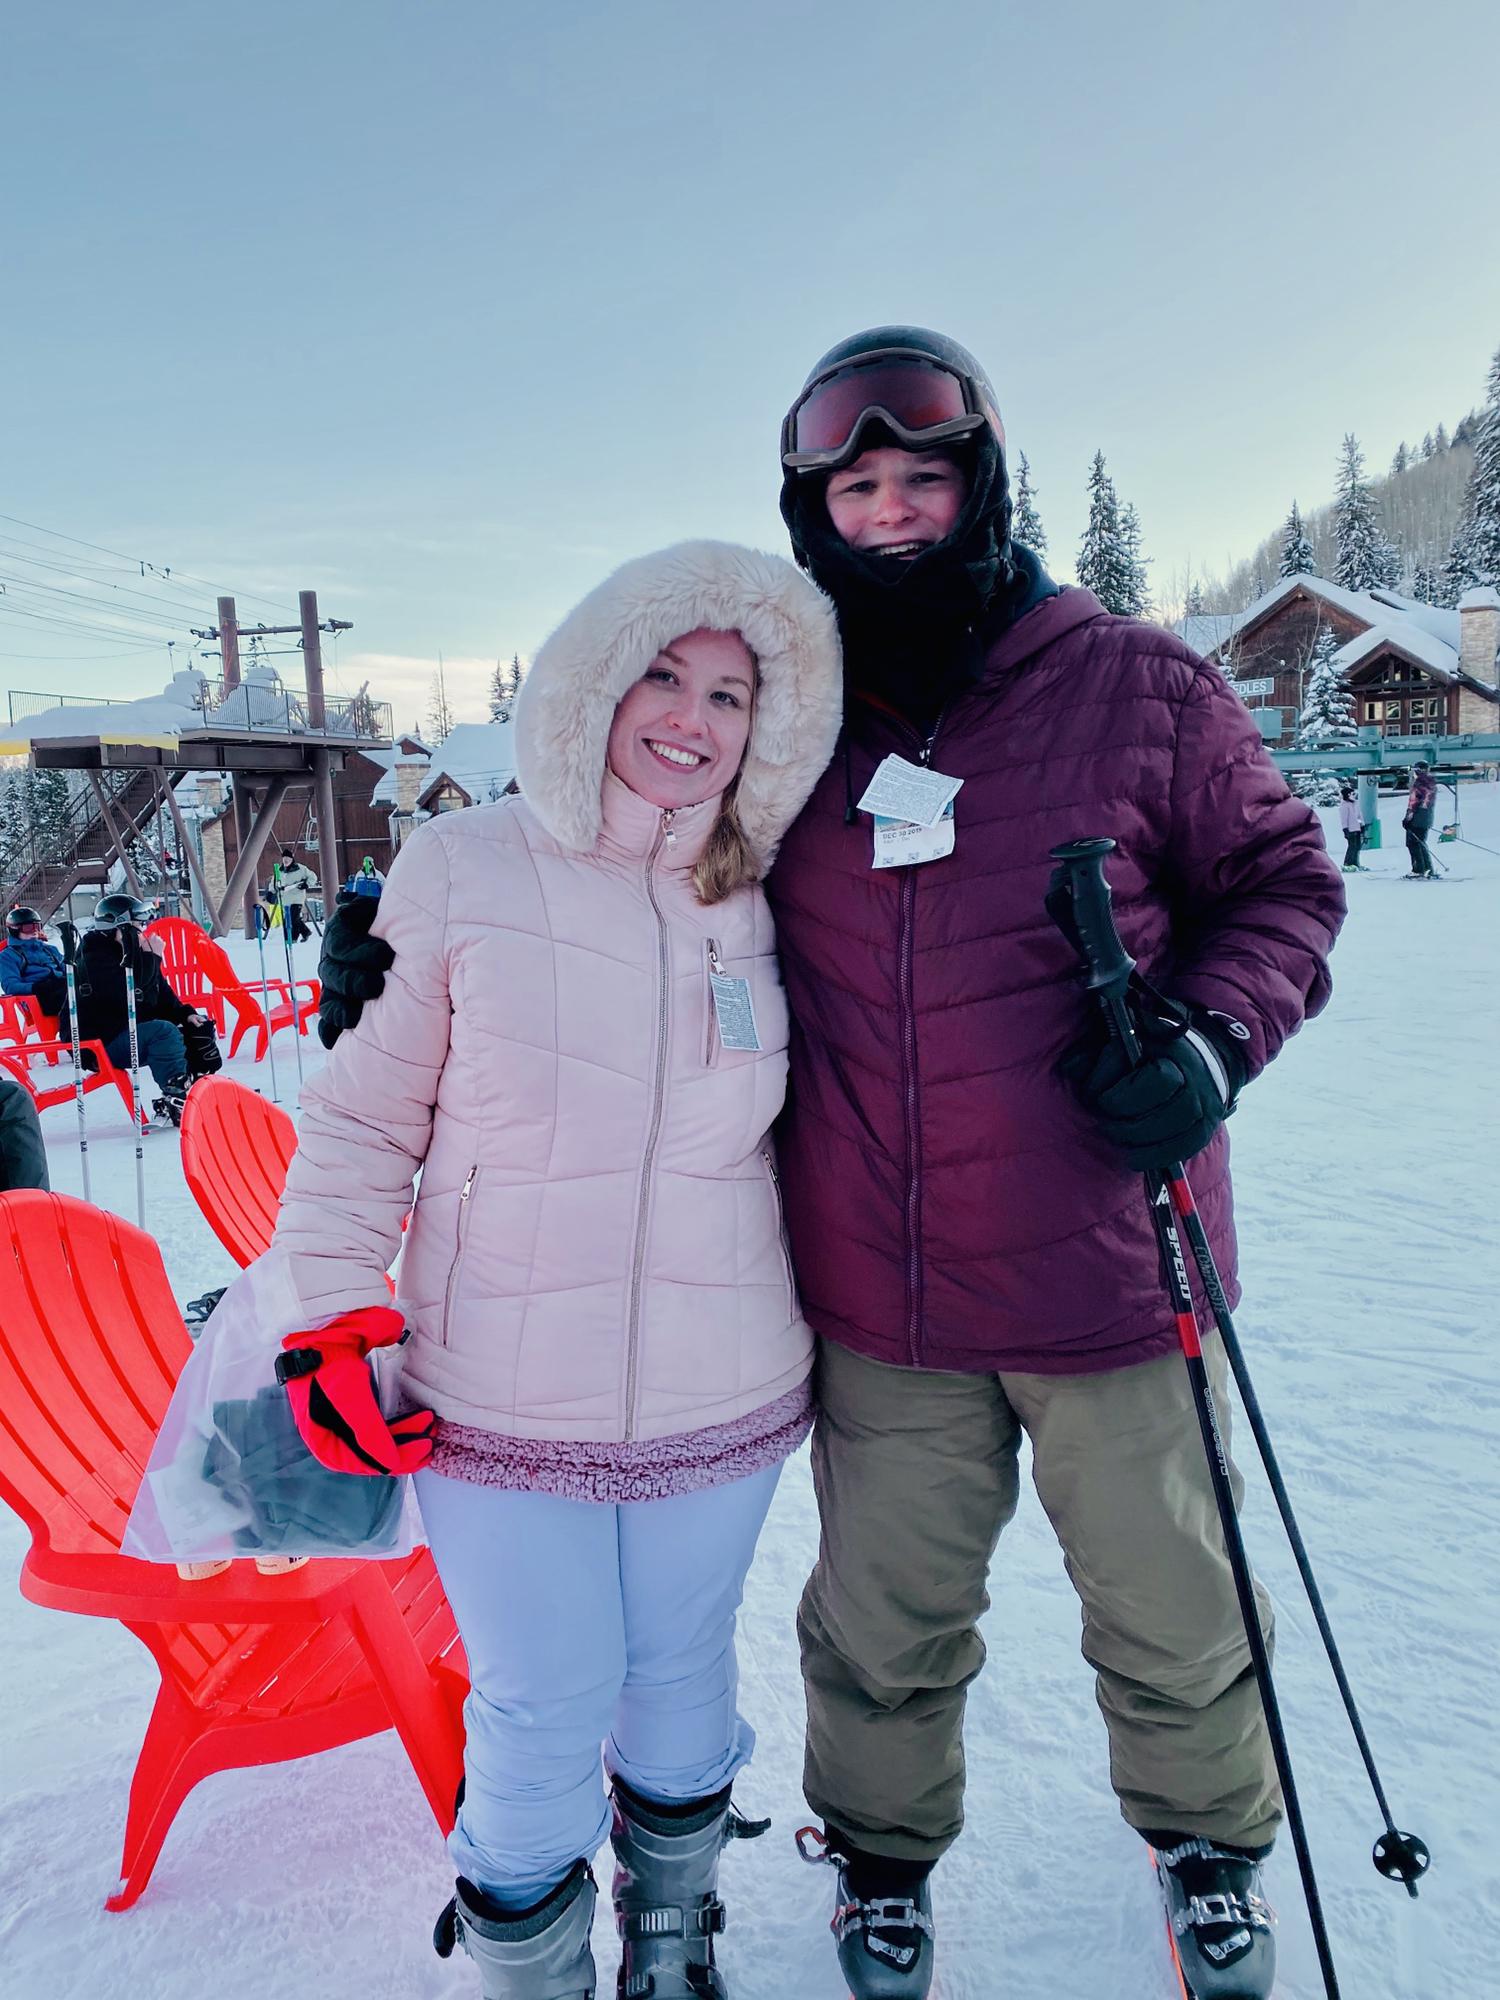 Melissa's first ski trip with Noah's family. Noah tried to teach Melissa how to ski - it was not successful.